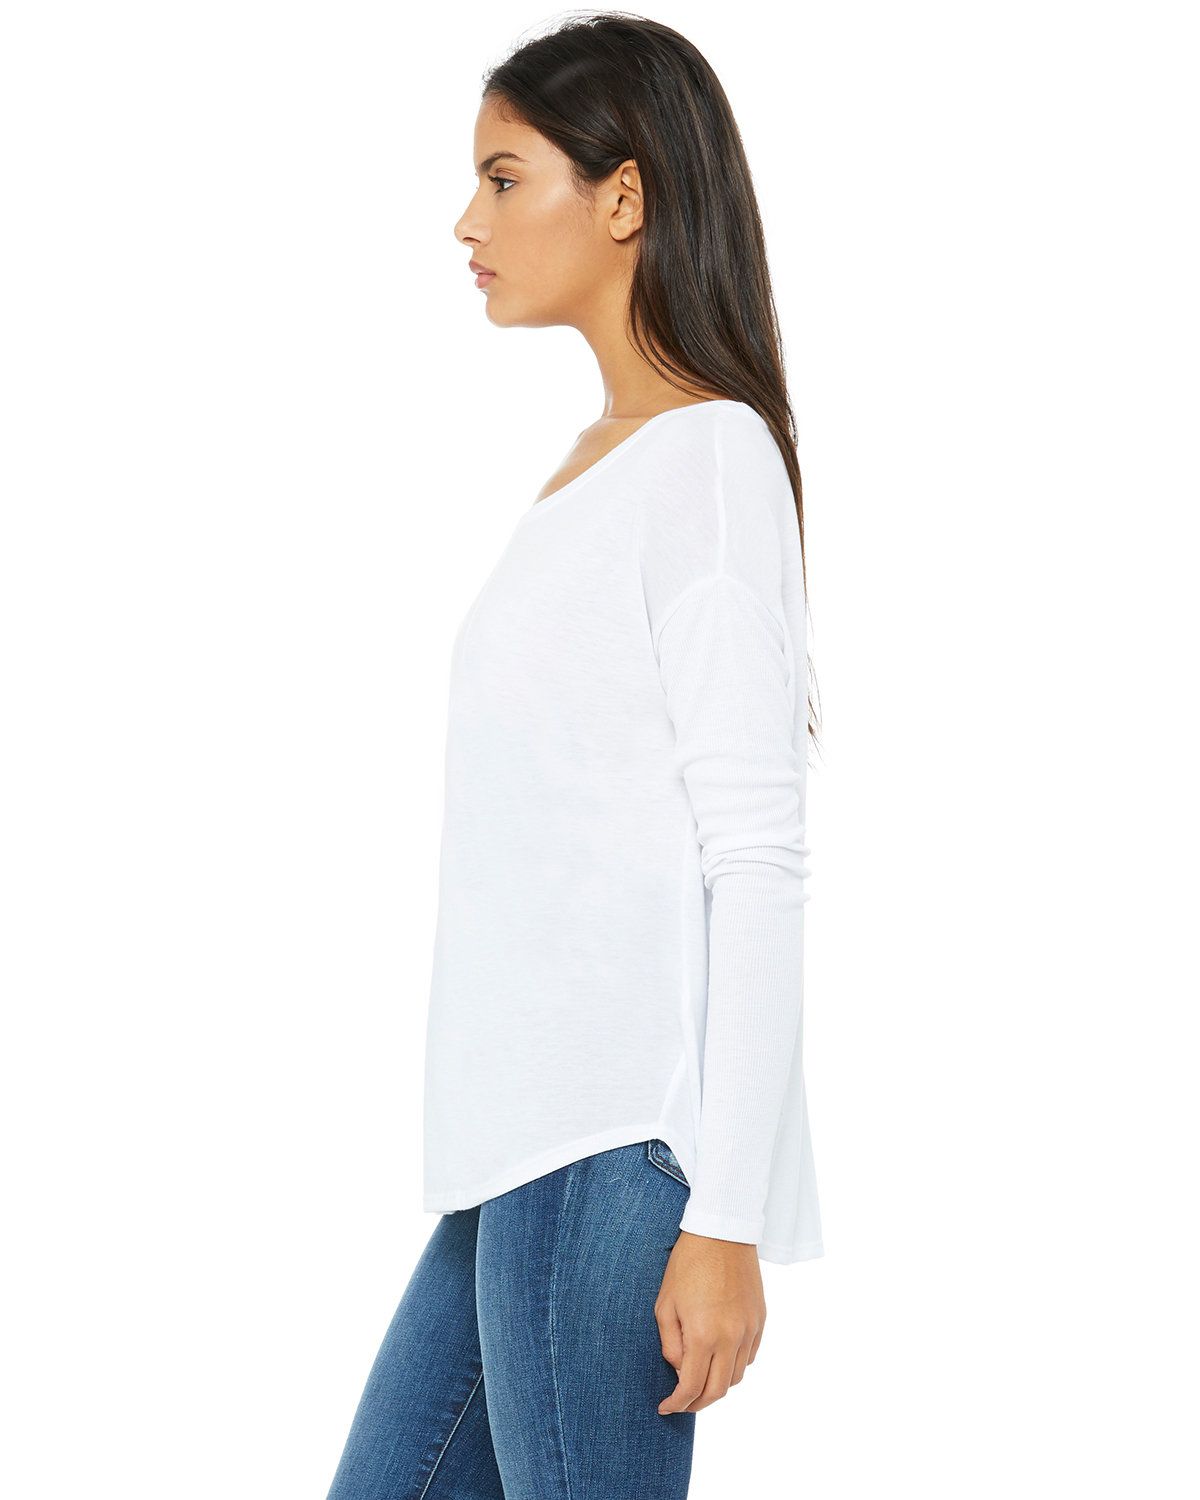 Download Wholesale Bella Canvas 8852 | Buy Ladies Flowy Long-Sleeve T-Shirt with 2x1 Sleeves - VeeTrends.com